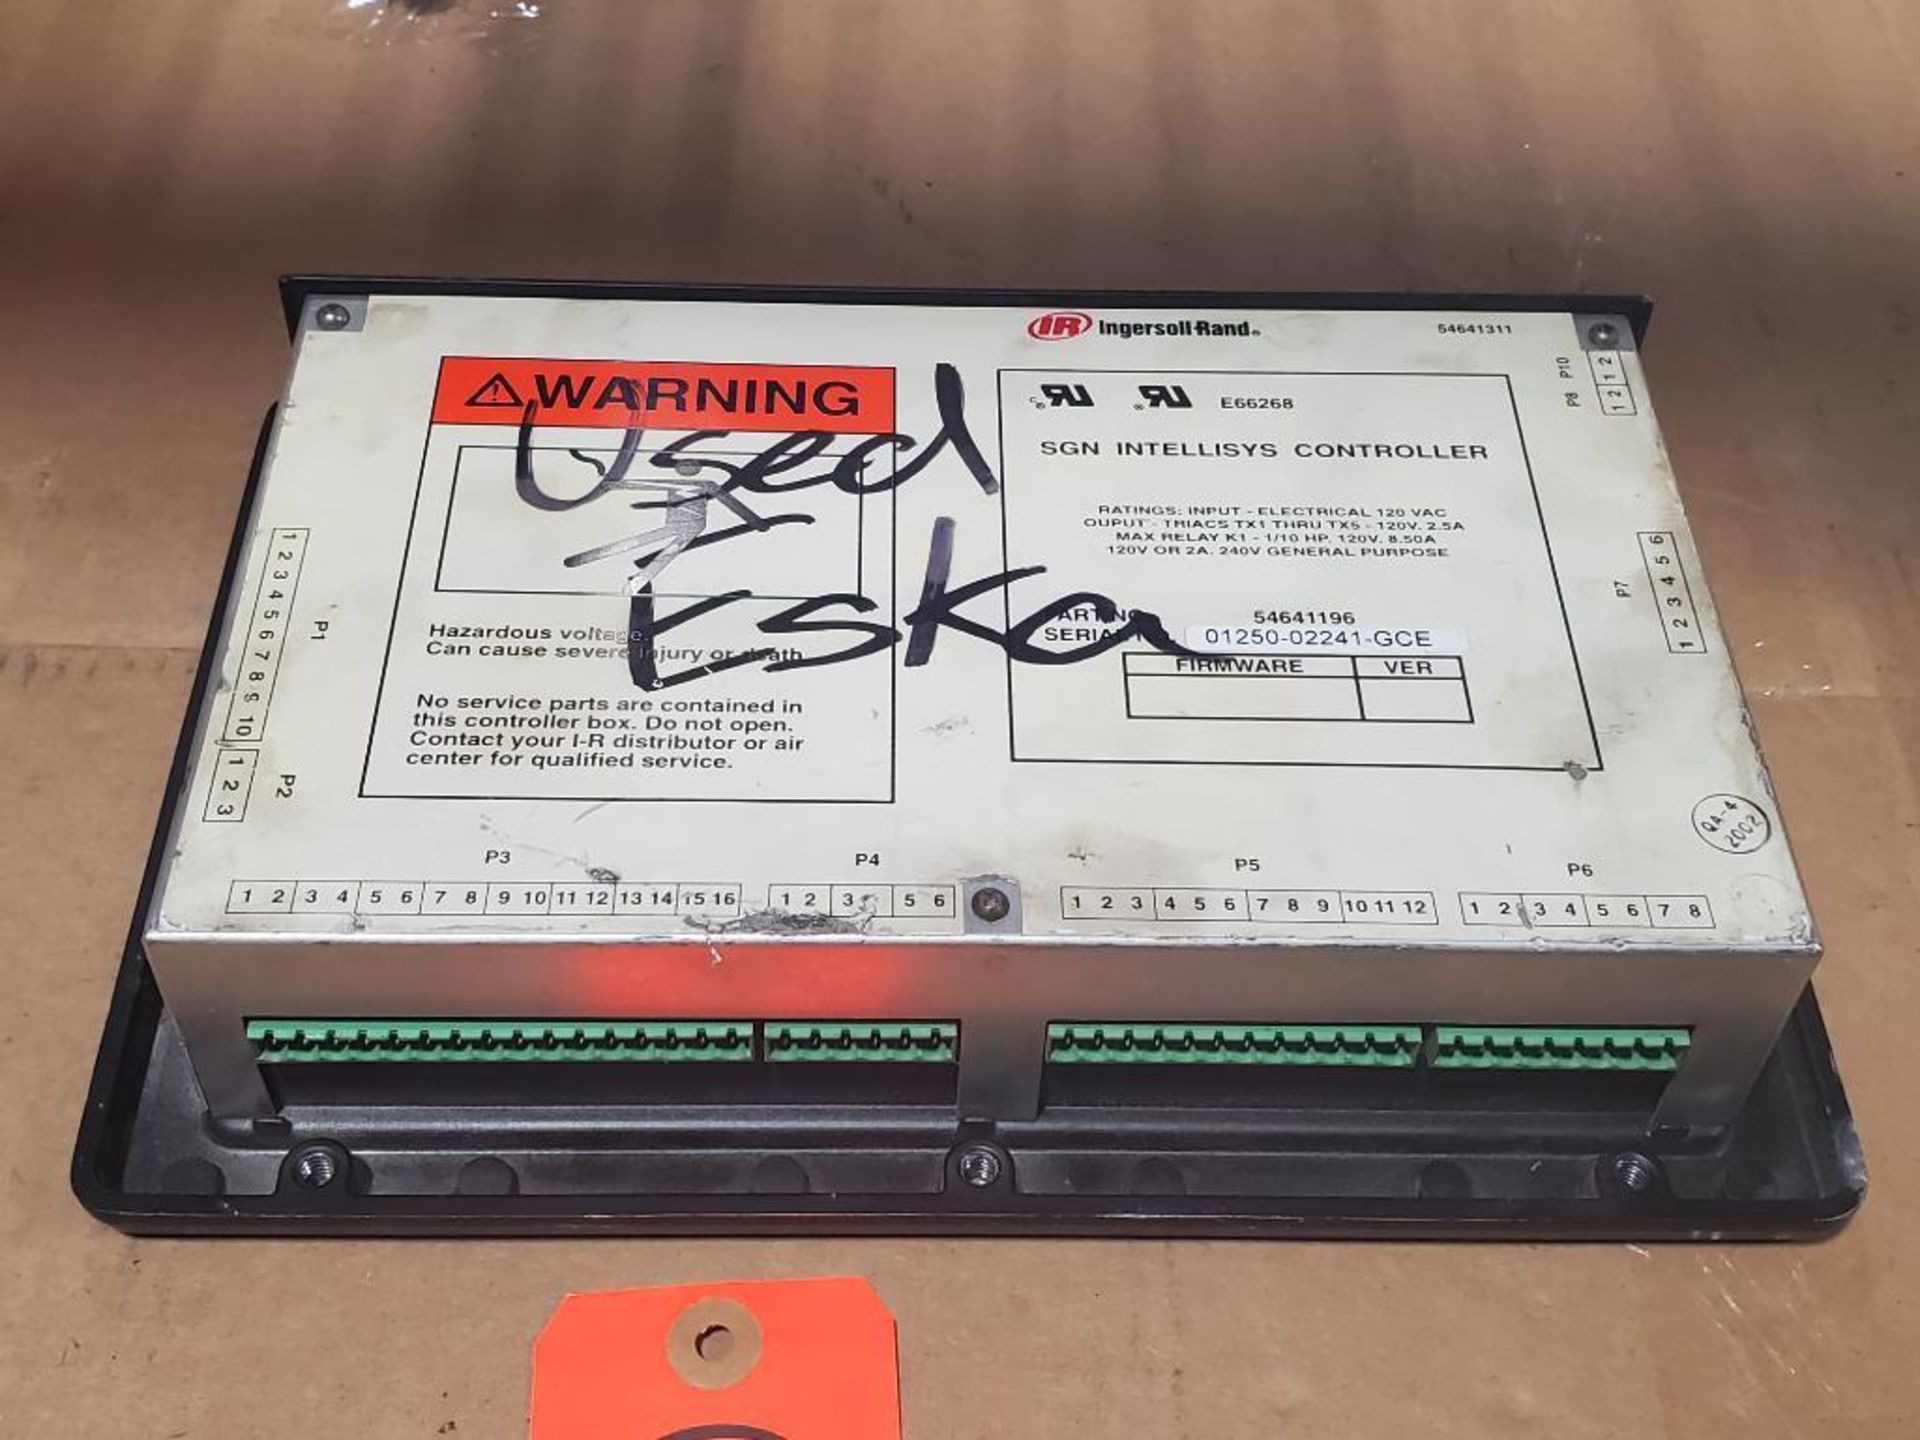 Ingersoll Rand SGN Intellisys controller. E66268. - Image 5 of 6